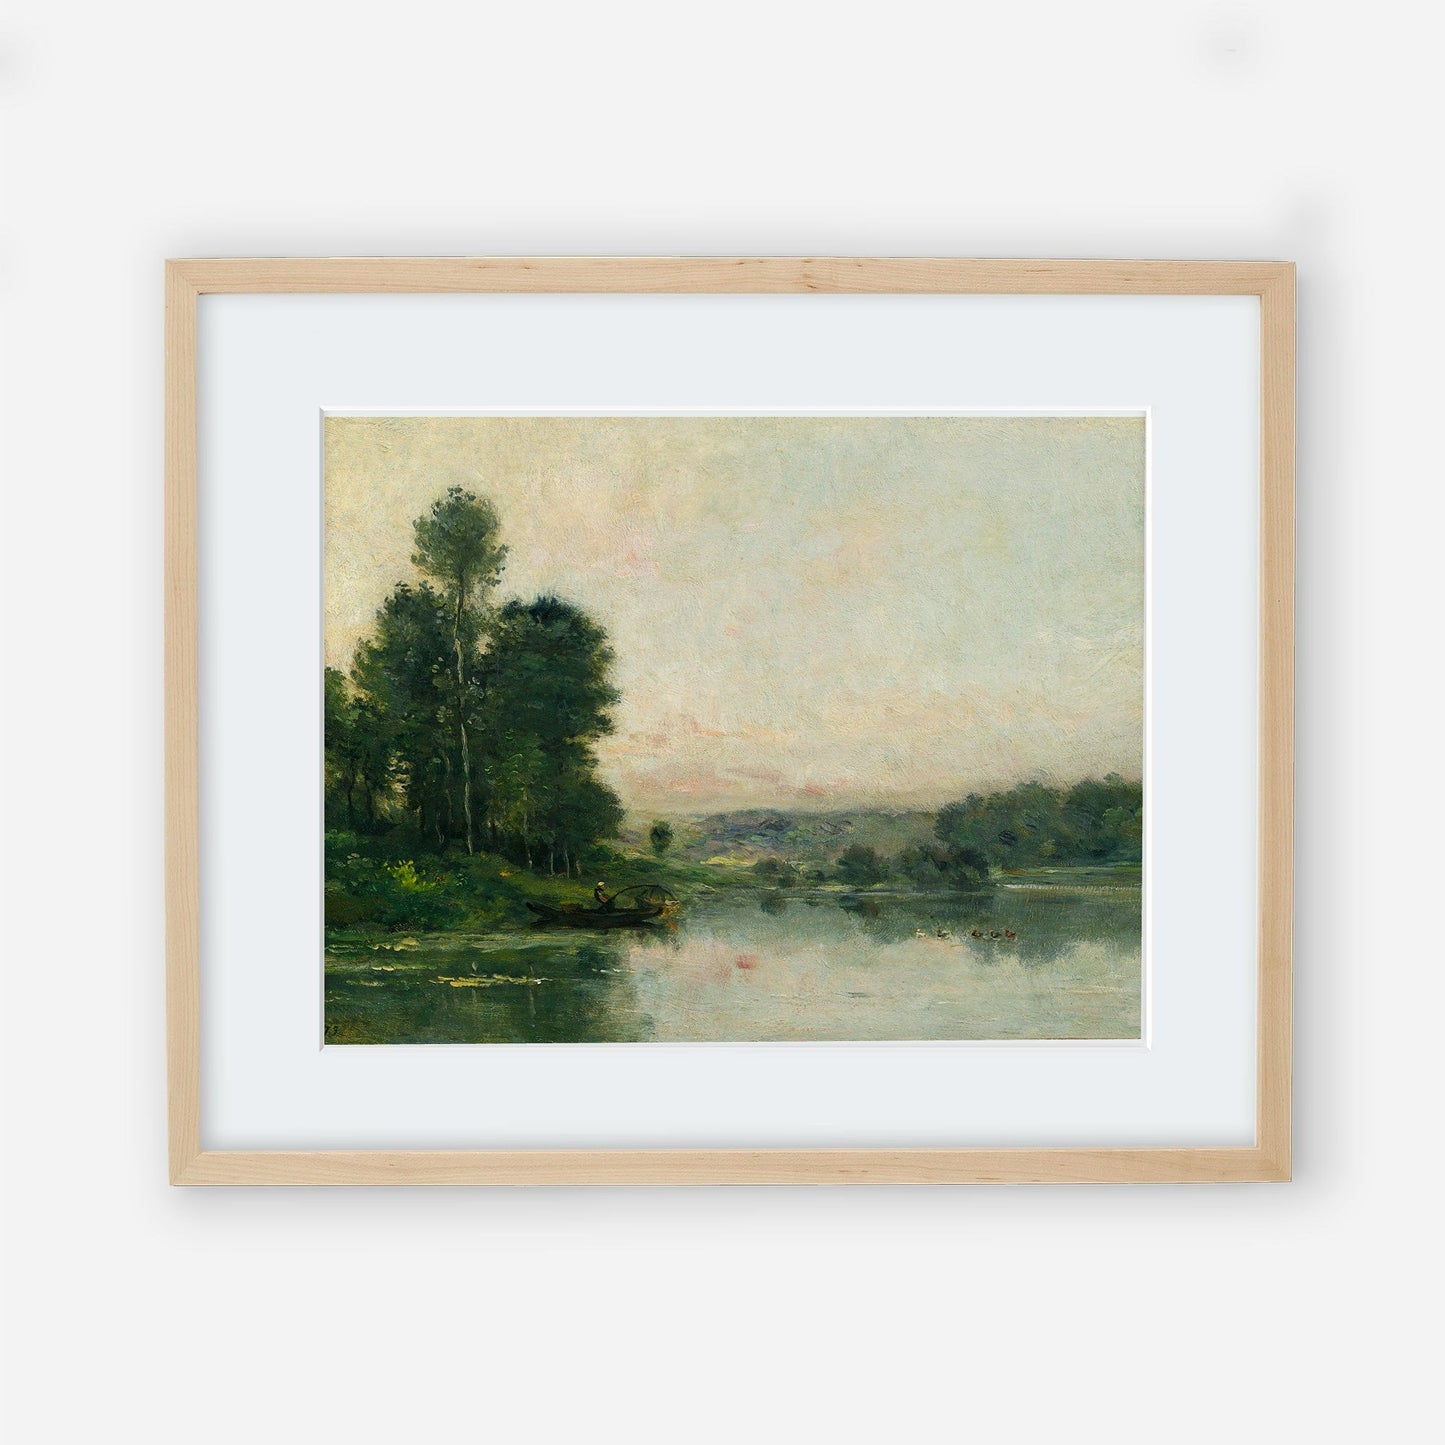 At the Lakes Edge - Vintage Landscape Painting Reproduction - Old Poster Print - Greenery Landscape - Printed and Shipped to You